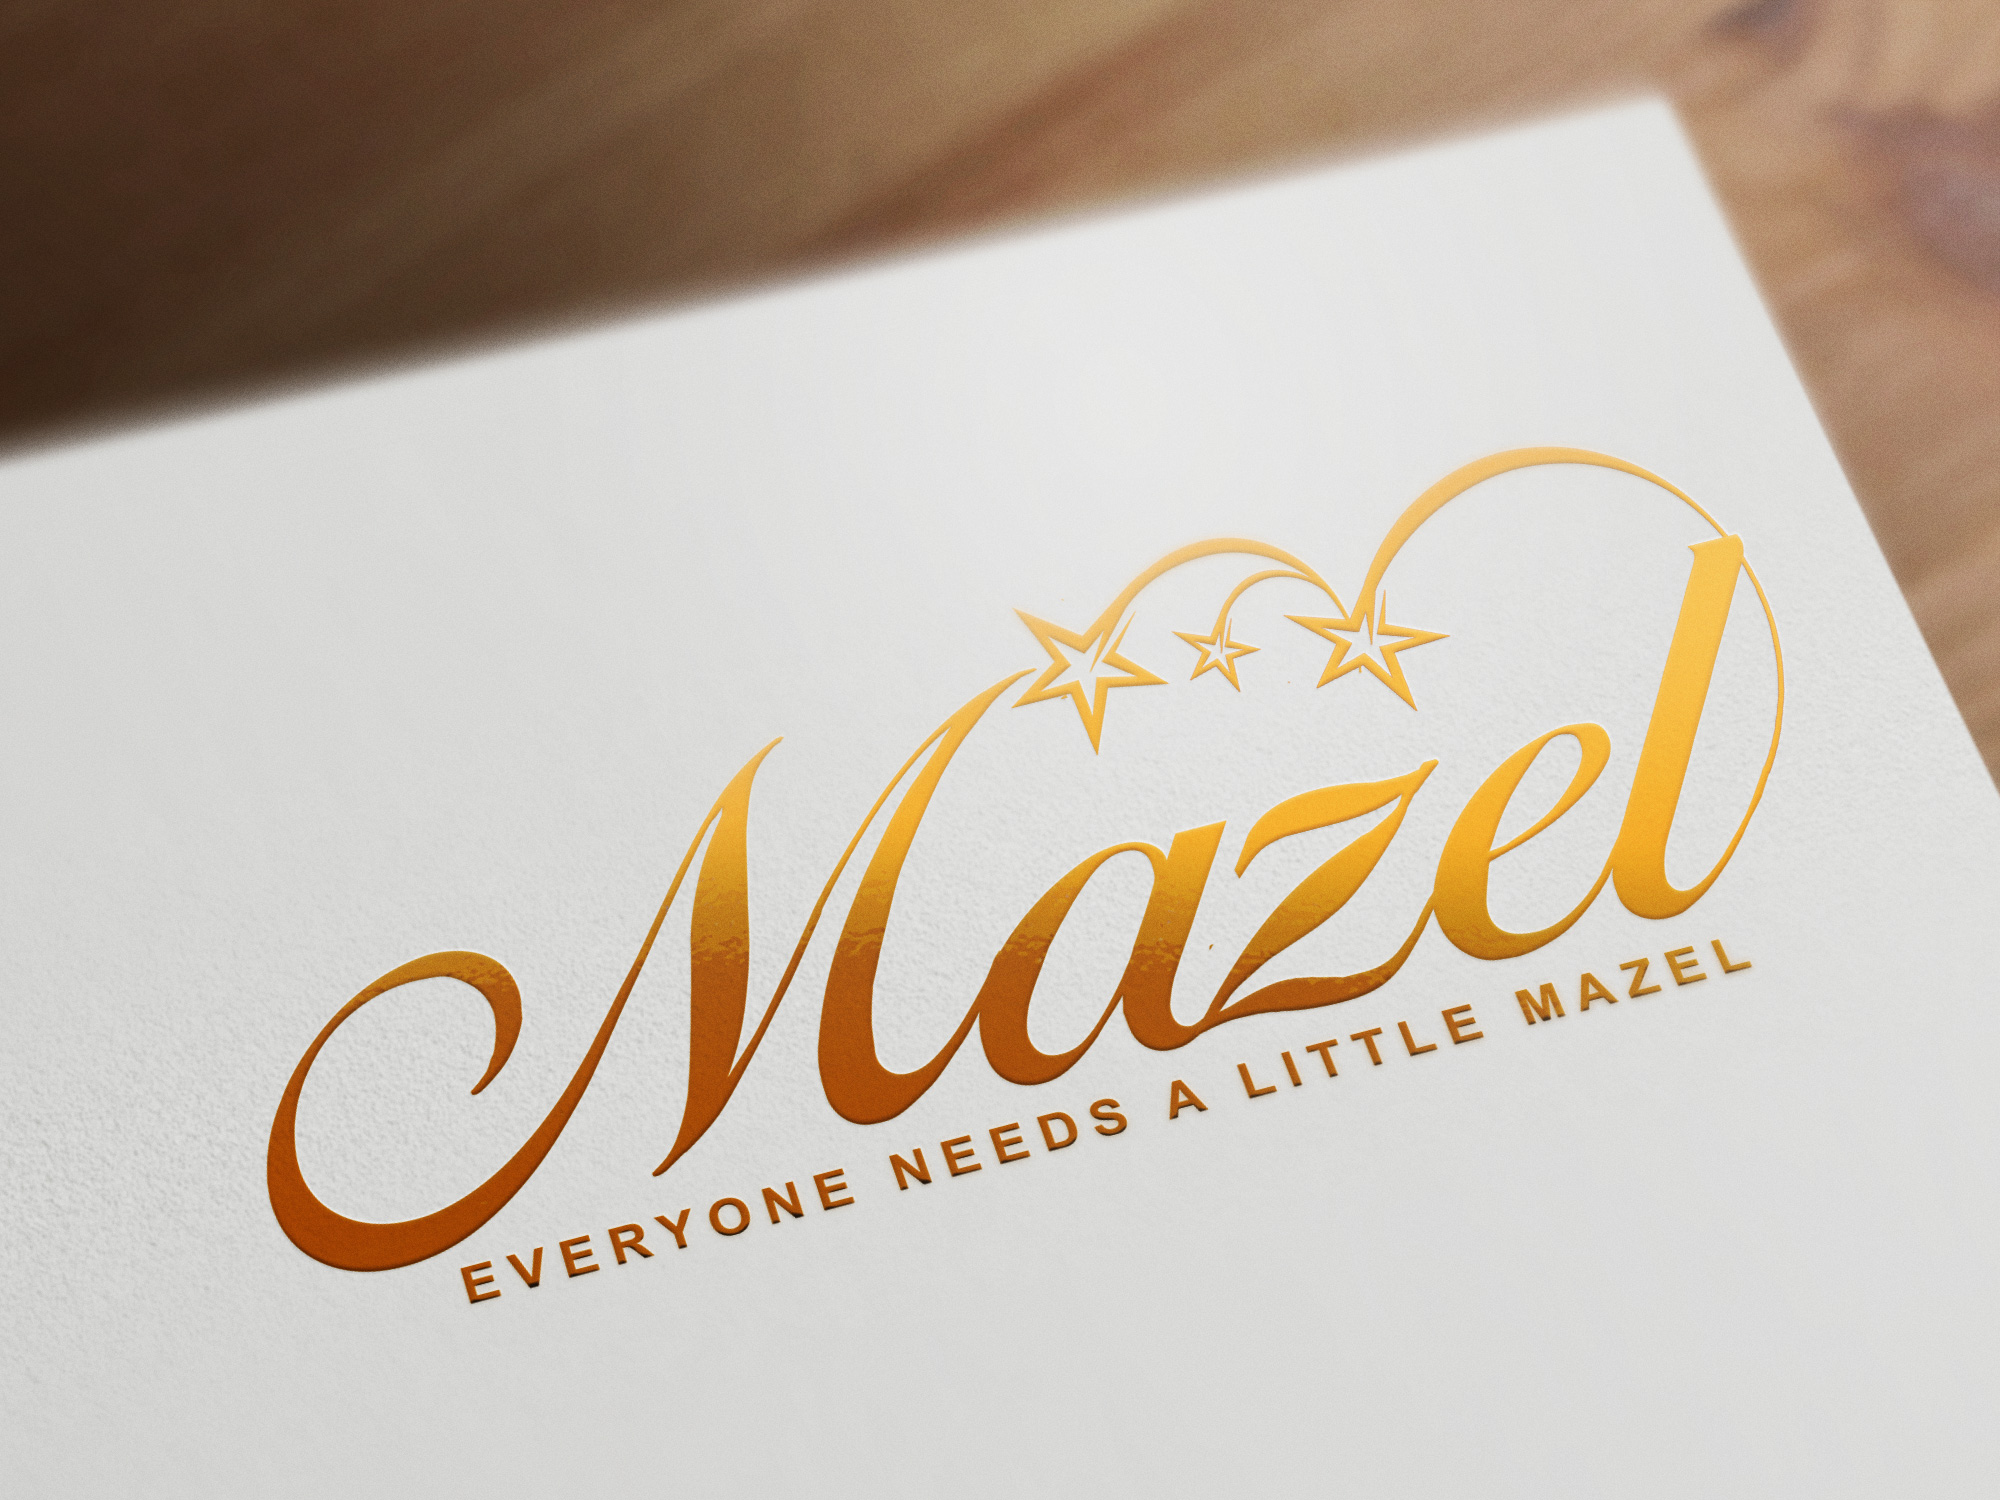 Mazel Means Good Luck